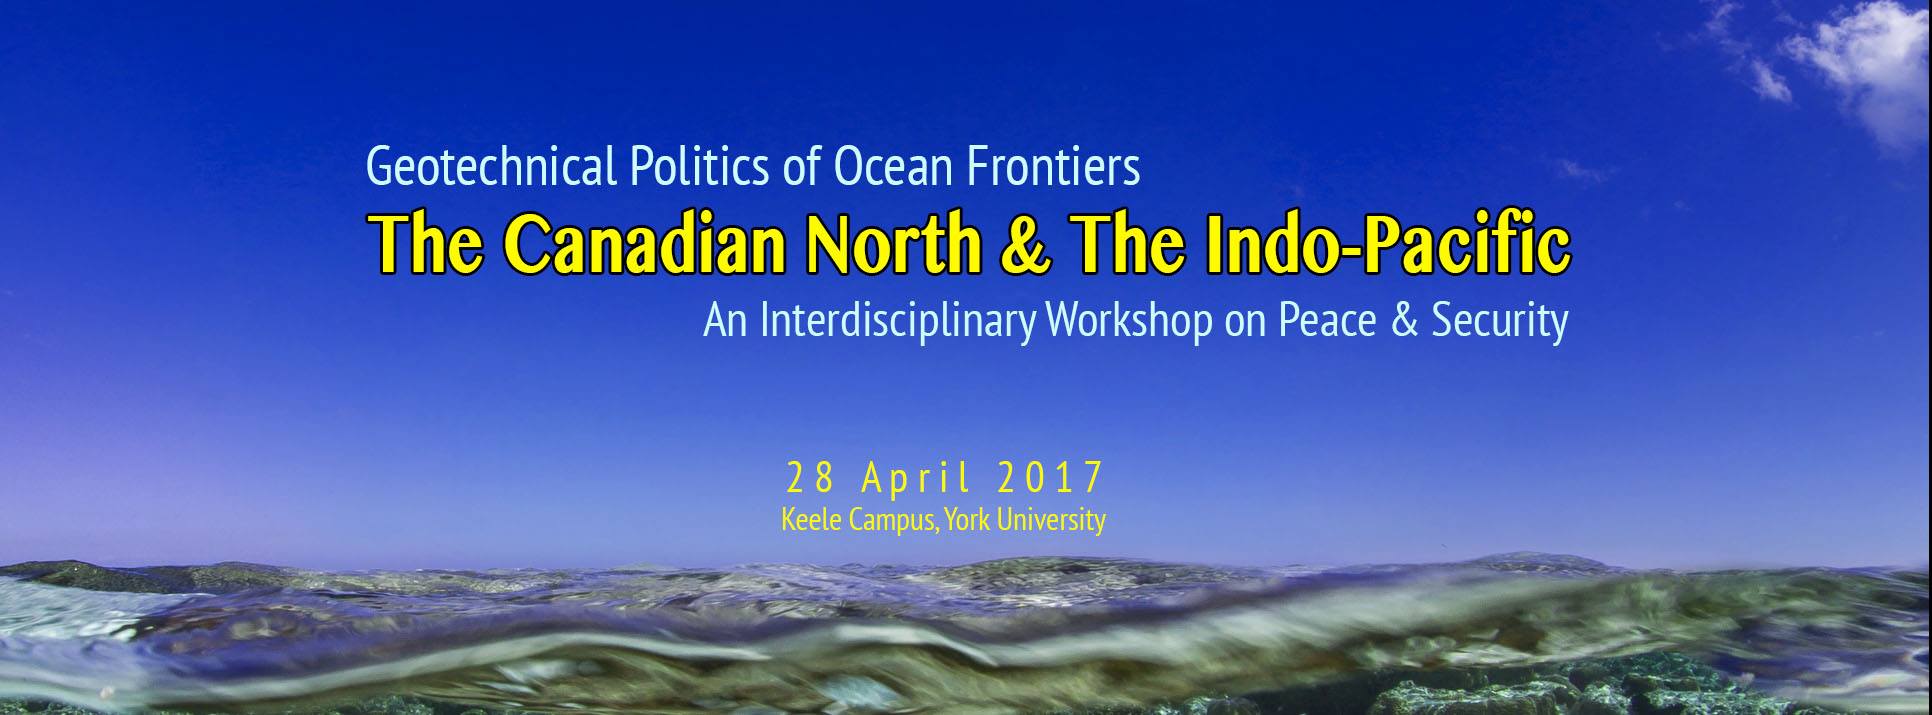 Geotechnical Politics of Ocean Frontiers: The Canadian North & the Indo-Pacific